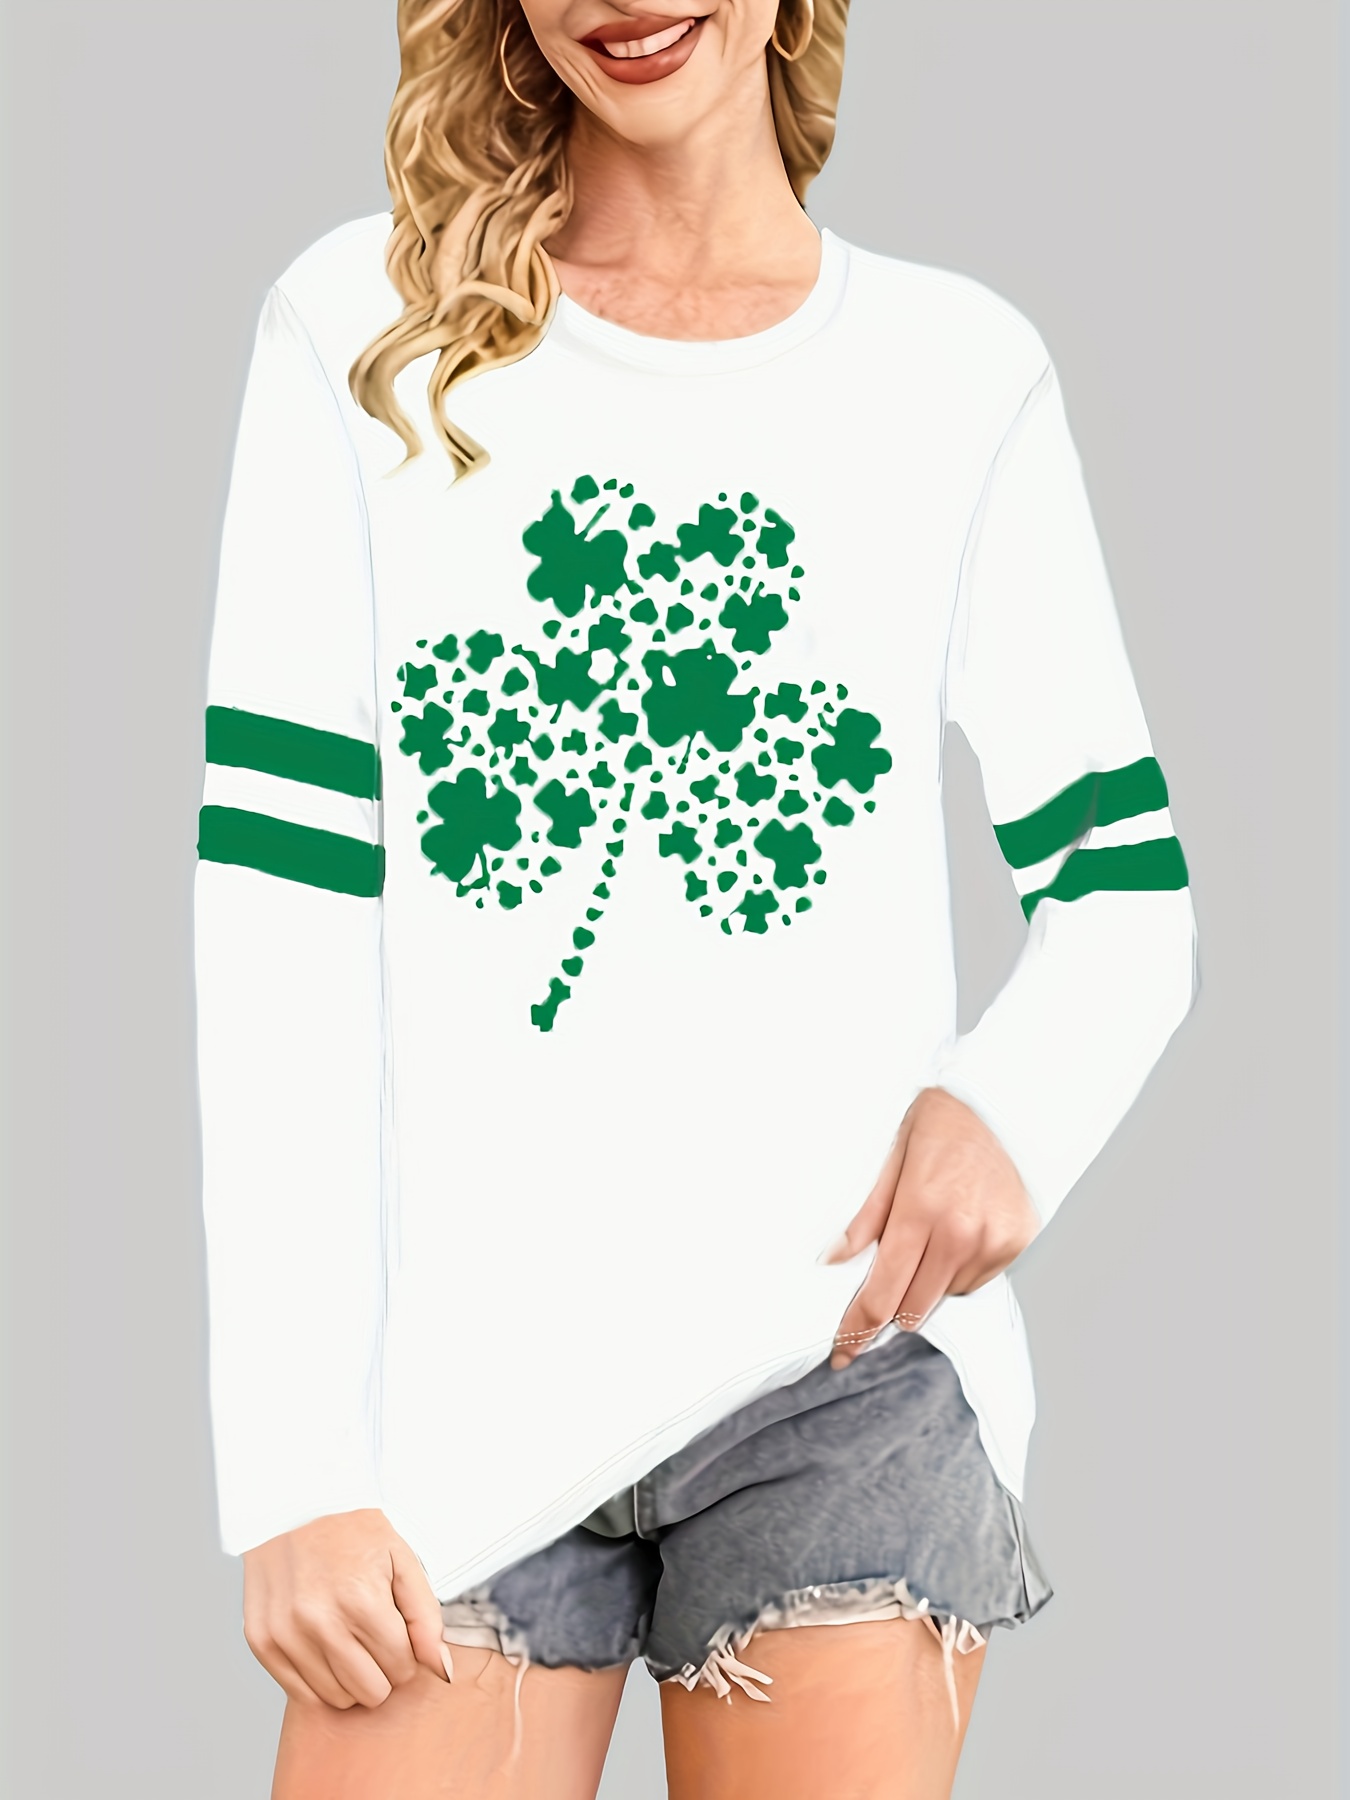 Amtdh Women's T Shirts St. Patrick's Day Printed Pullover Teen Girls  Fashion Crewneck Tunic Tops for Women Short Sleeve Y2K Clothes Tee Plus  Size T Shirts - teejeep